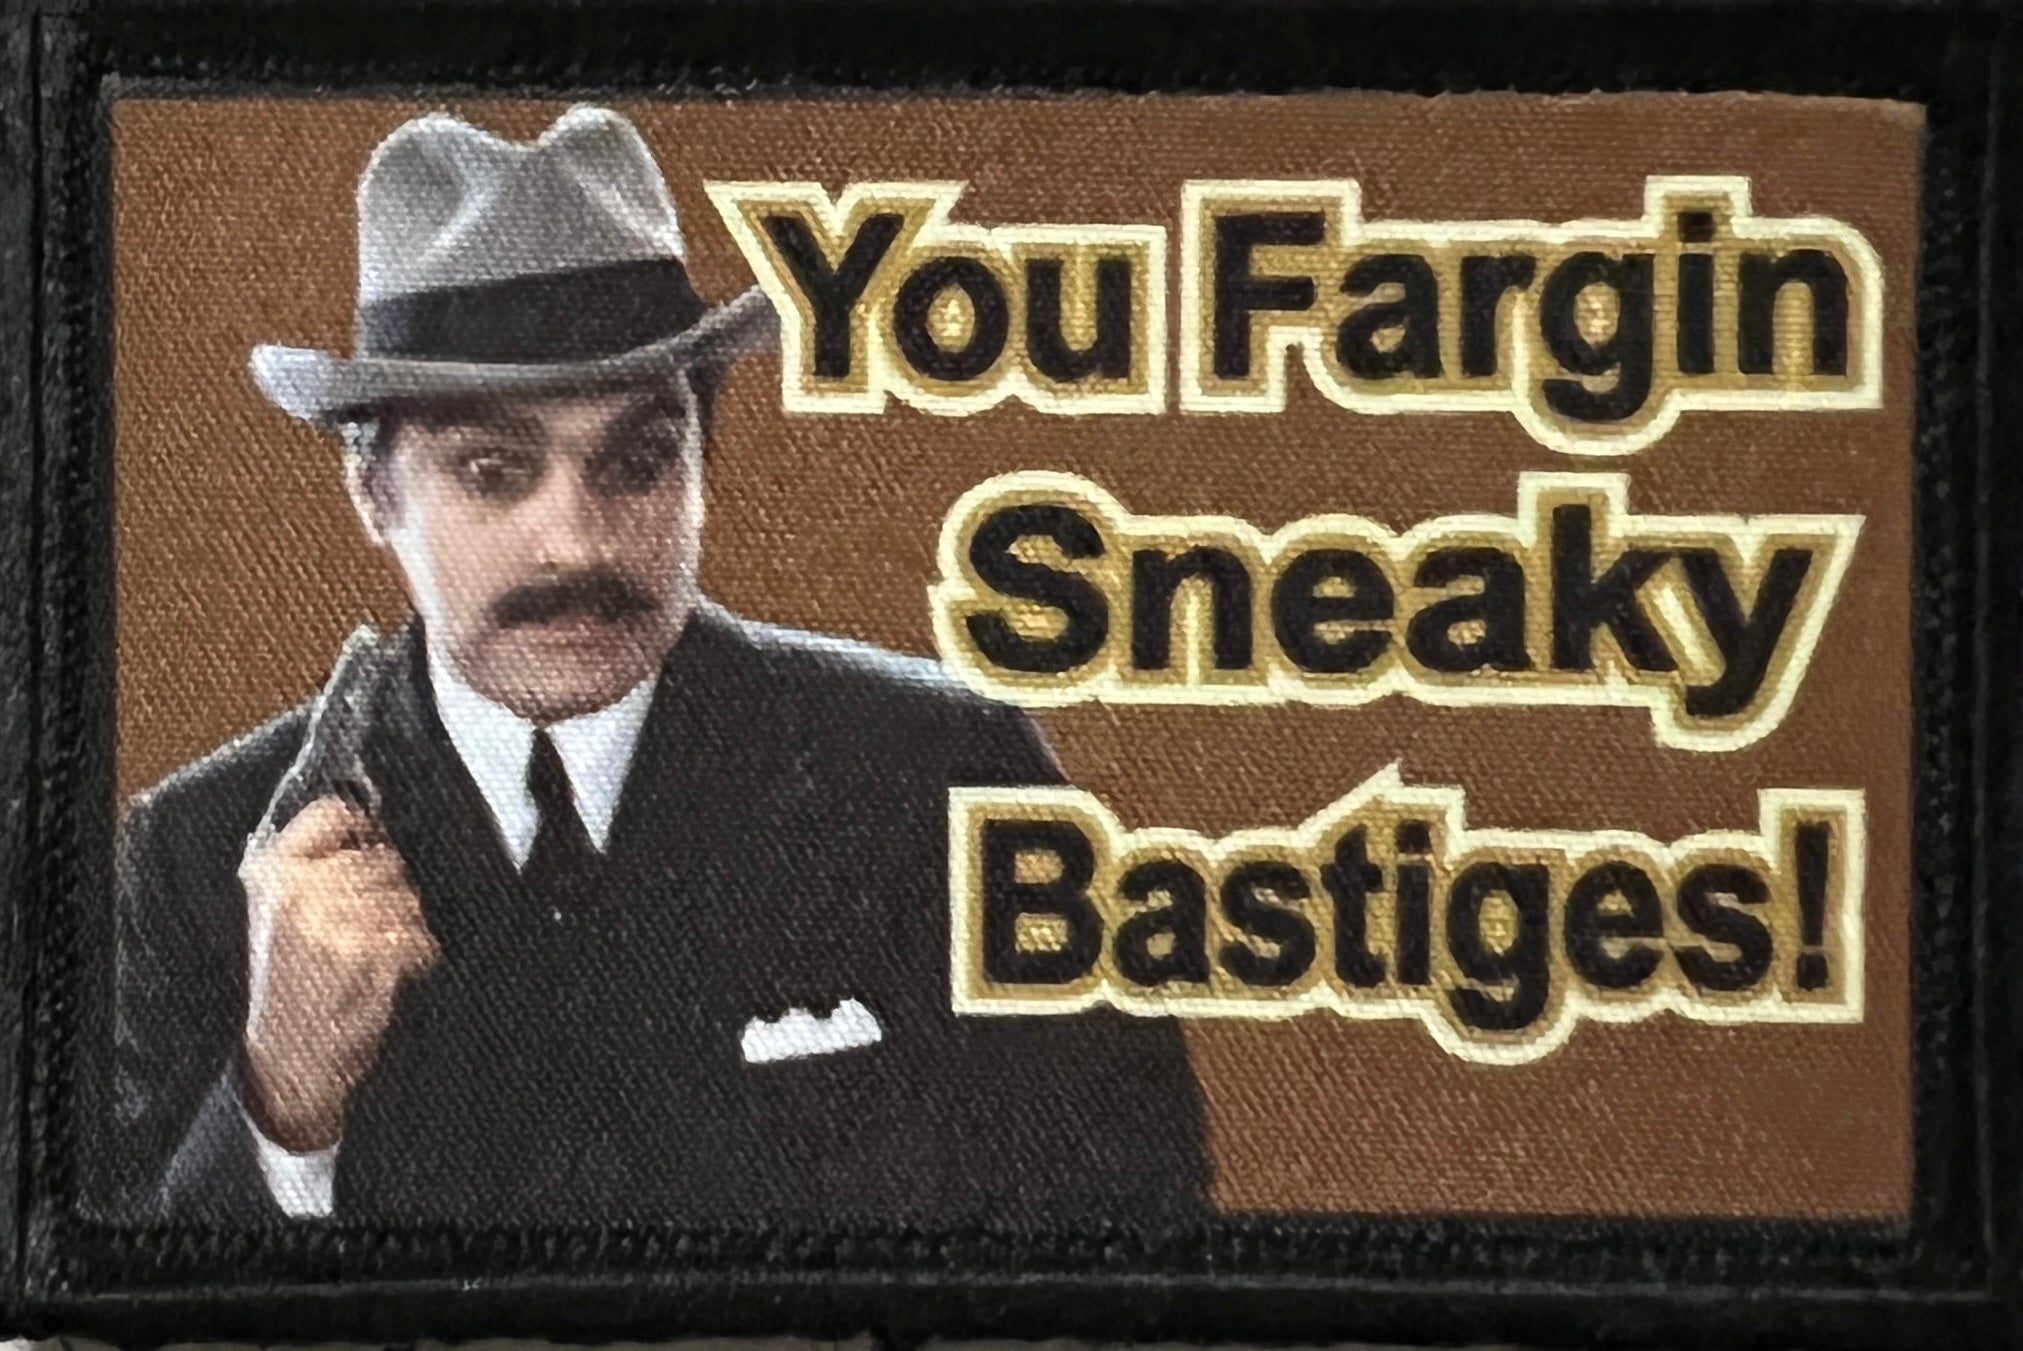 Johnny Dangerously Sneaky Bastiges!